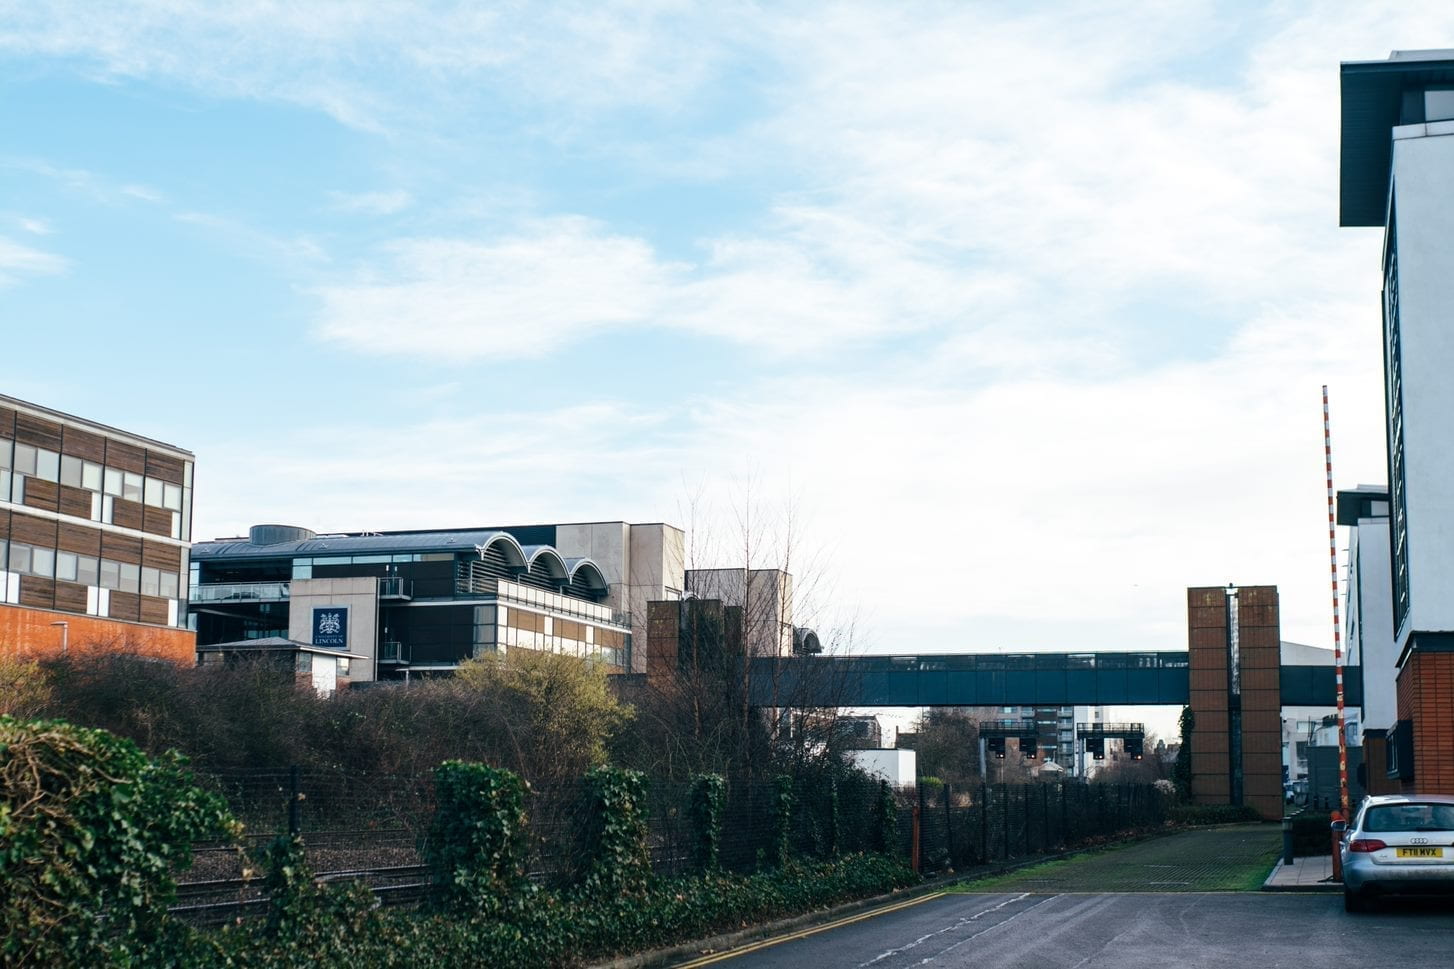 Photo of some of the University of Lincoln's buildings on campus on a bright day